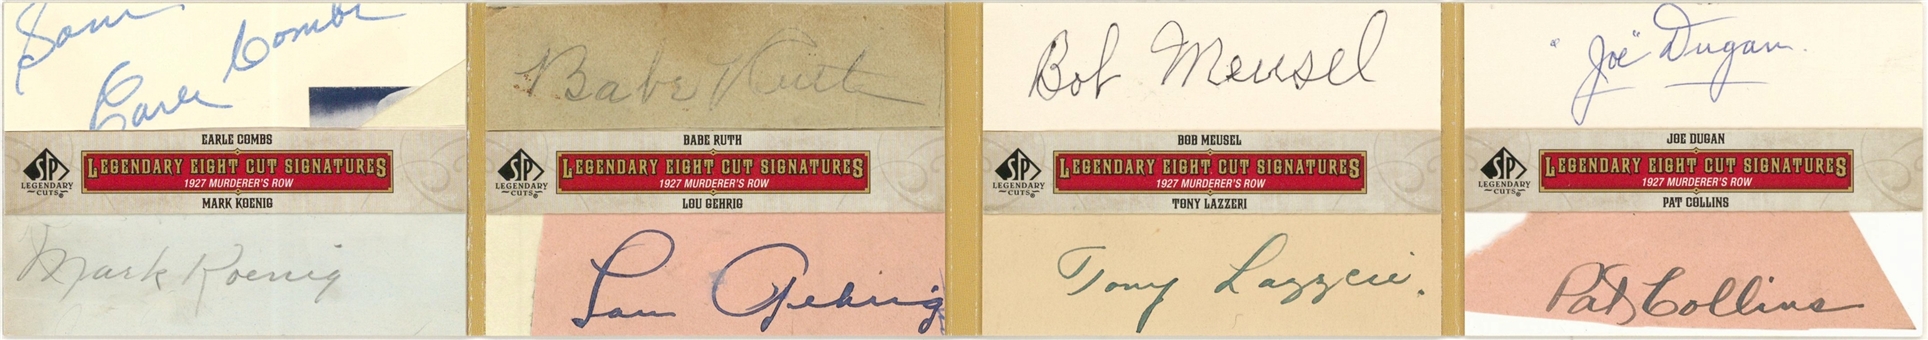 2011 SP Legendary Cuts "Legendary Eight Cut Signatures - Murderers Row" Multi-Signature Card (#1/1) – Featuring Babe Ruth, Lou Gehrig and Tony Lazzeri